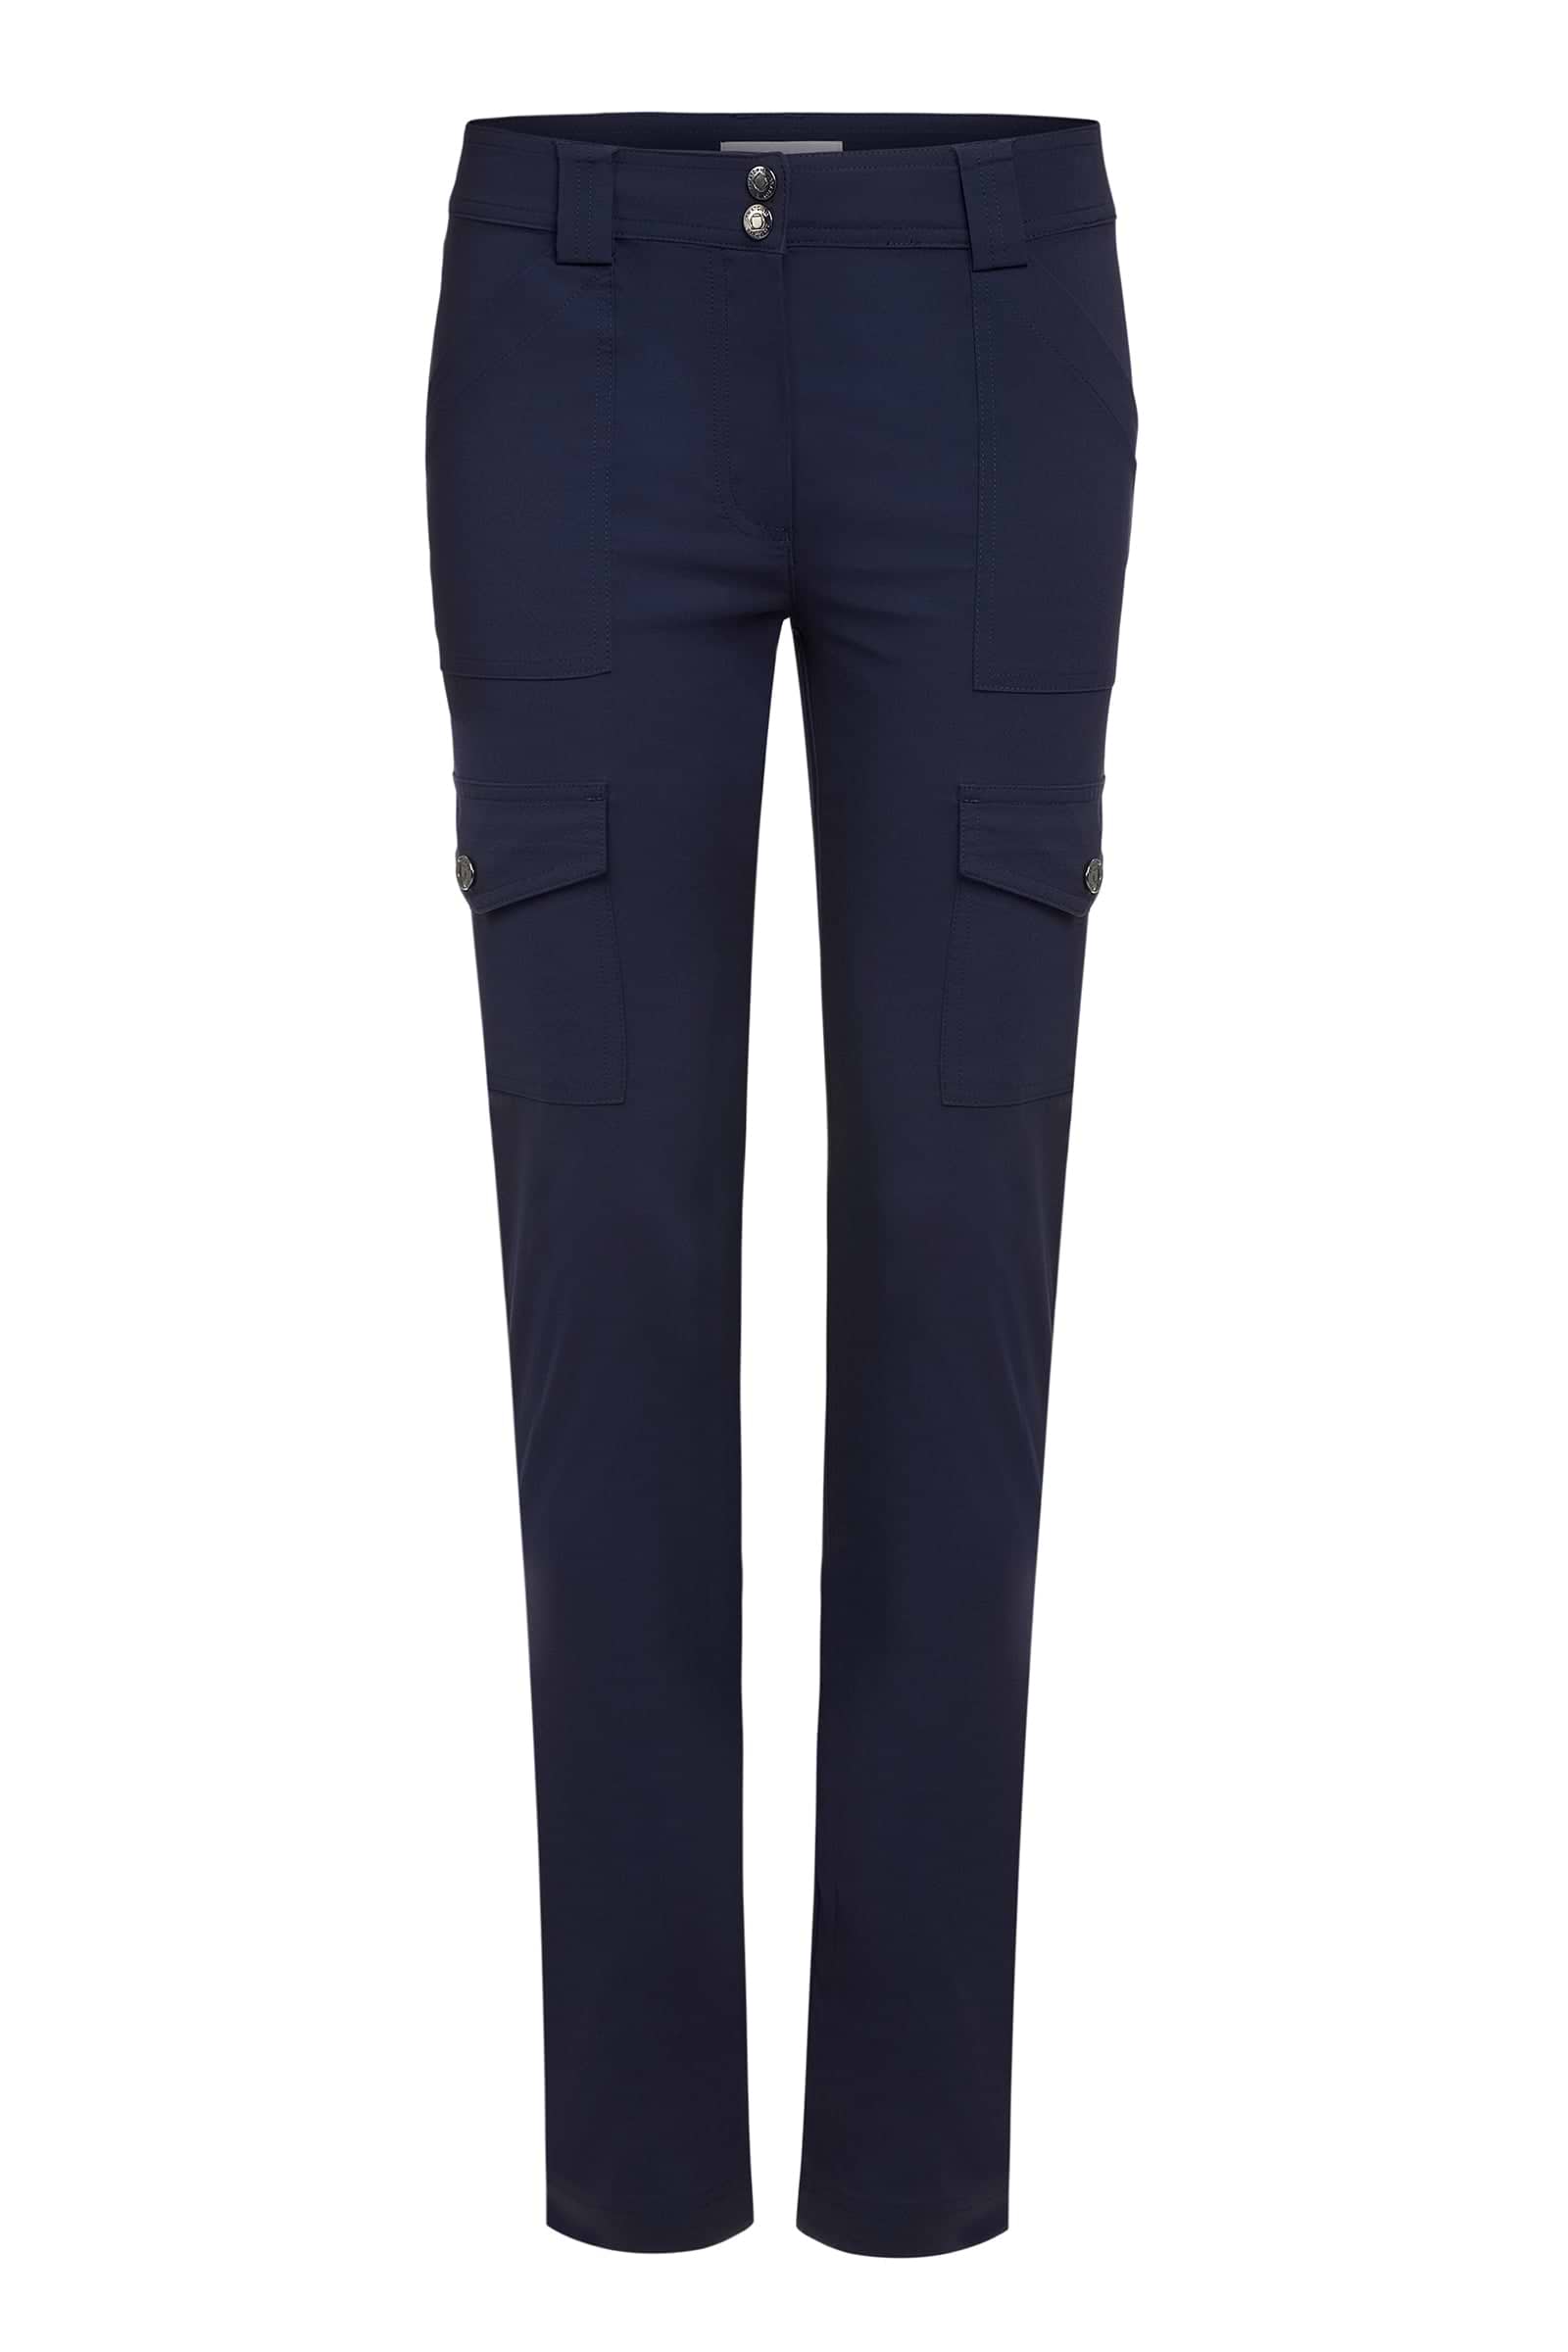 The Best Travel Cargo Pants. Flat Lay of the Kate Skinny Cargo Pant in Navy